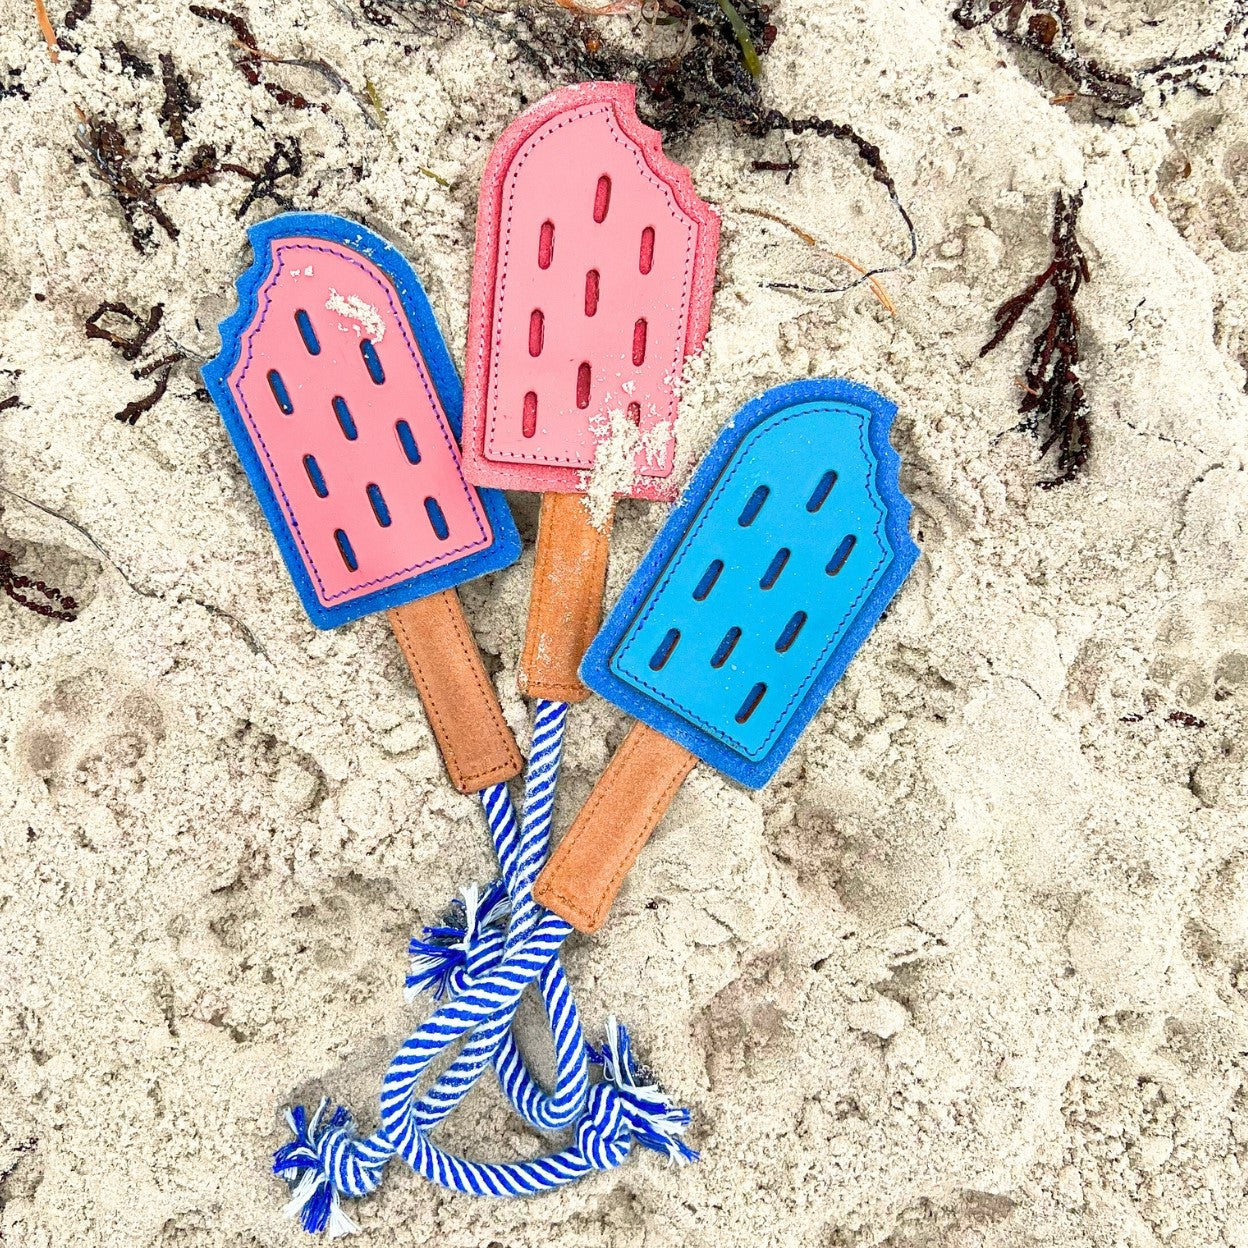 Three colorful Georgie Paws wooden Icy Pole decorations with blue, red, and pink tops stuck in beach sand, tied together with a compostable blue and white striped string, evoking summer vibes.